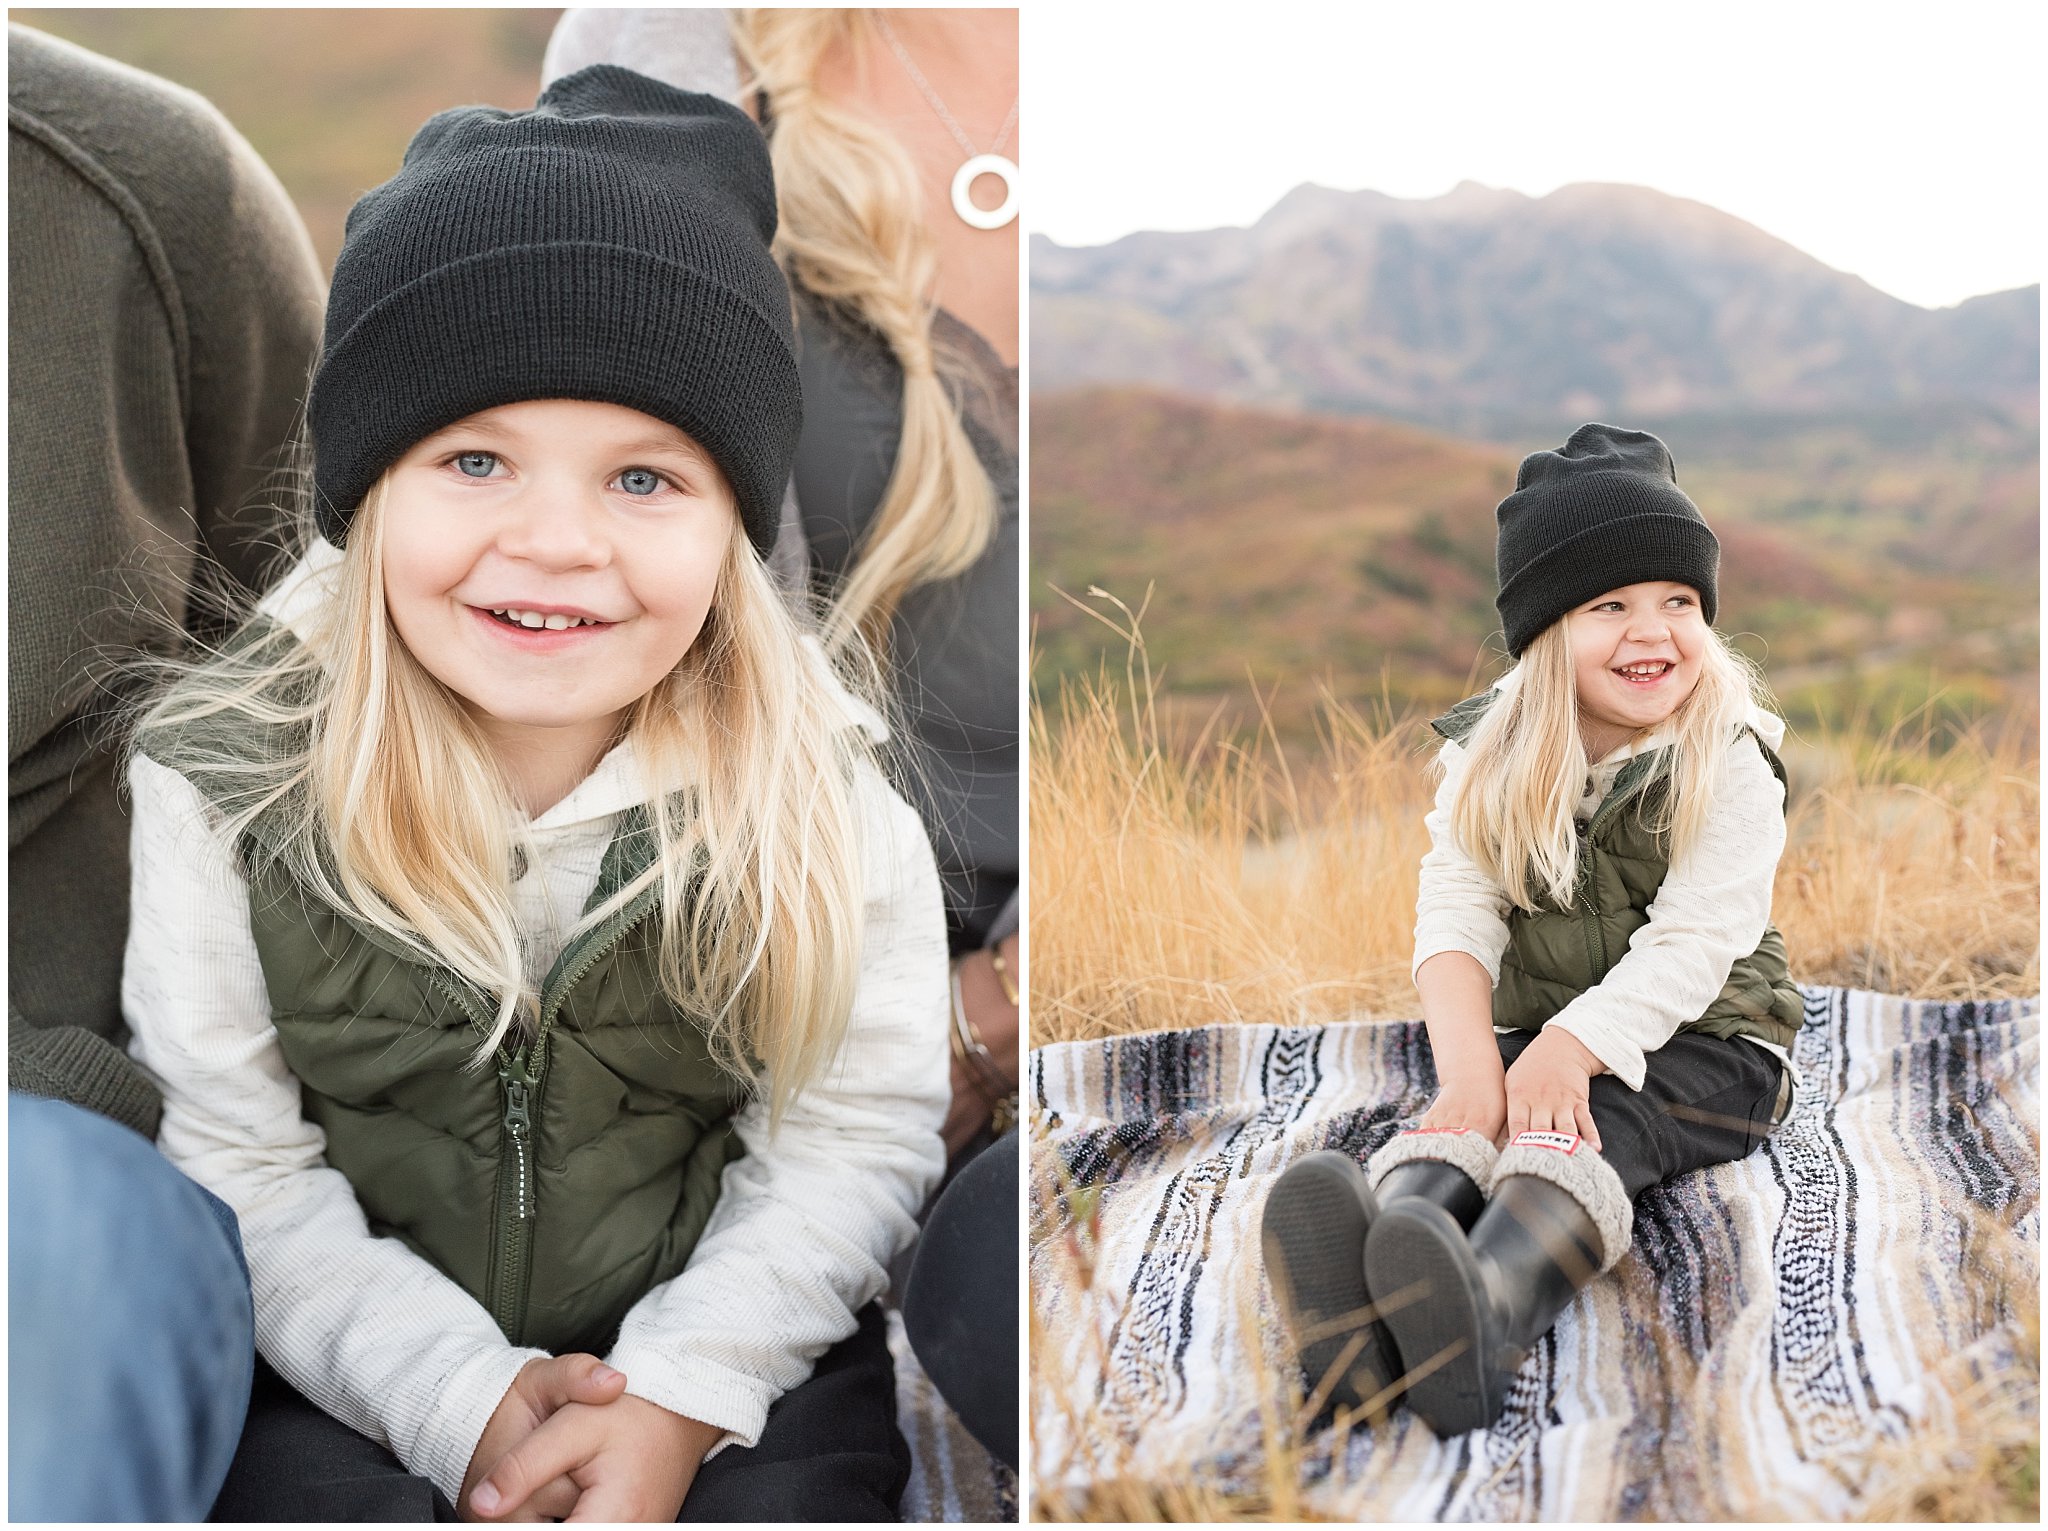 3 year old boy laughs and smiles in the mountains | Fall Family Pictures in the Mountains | Snowbasin, Utah | Jessie and Dallin